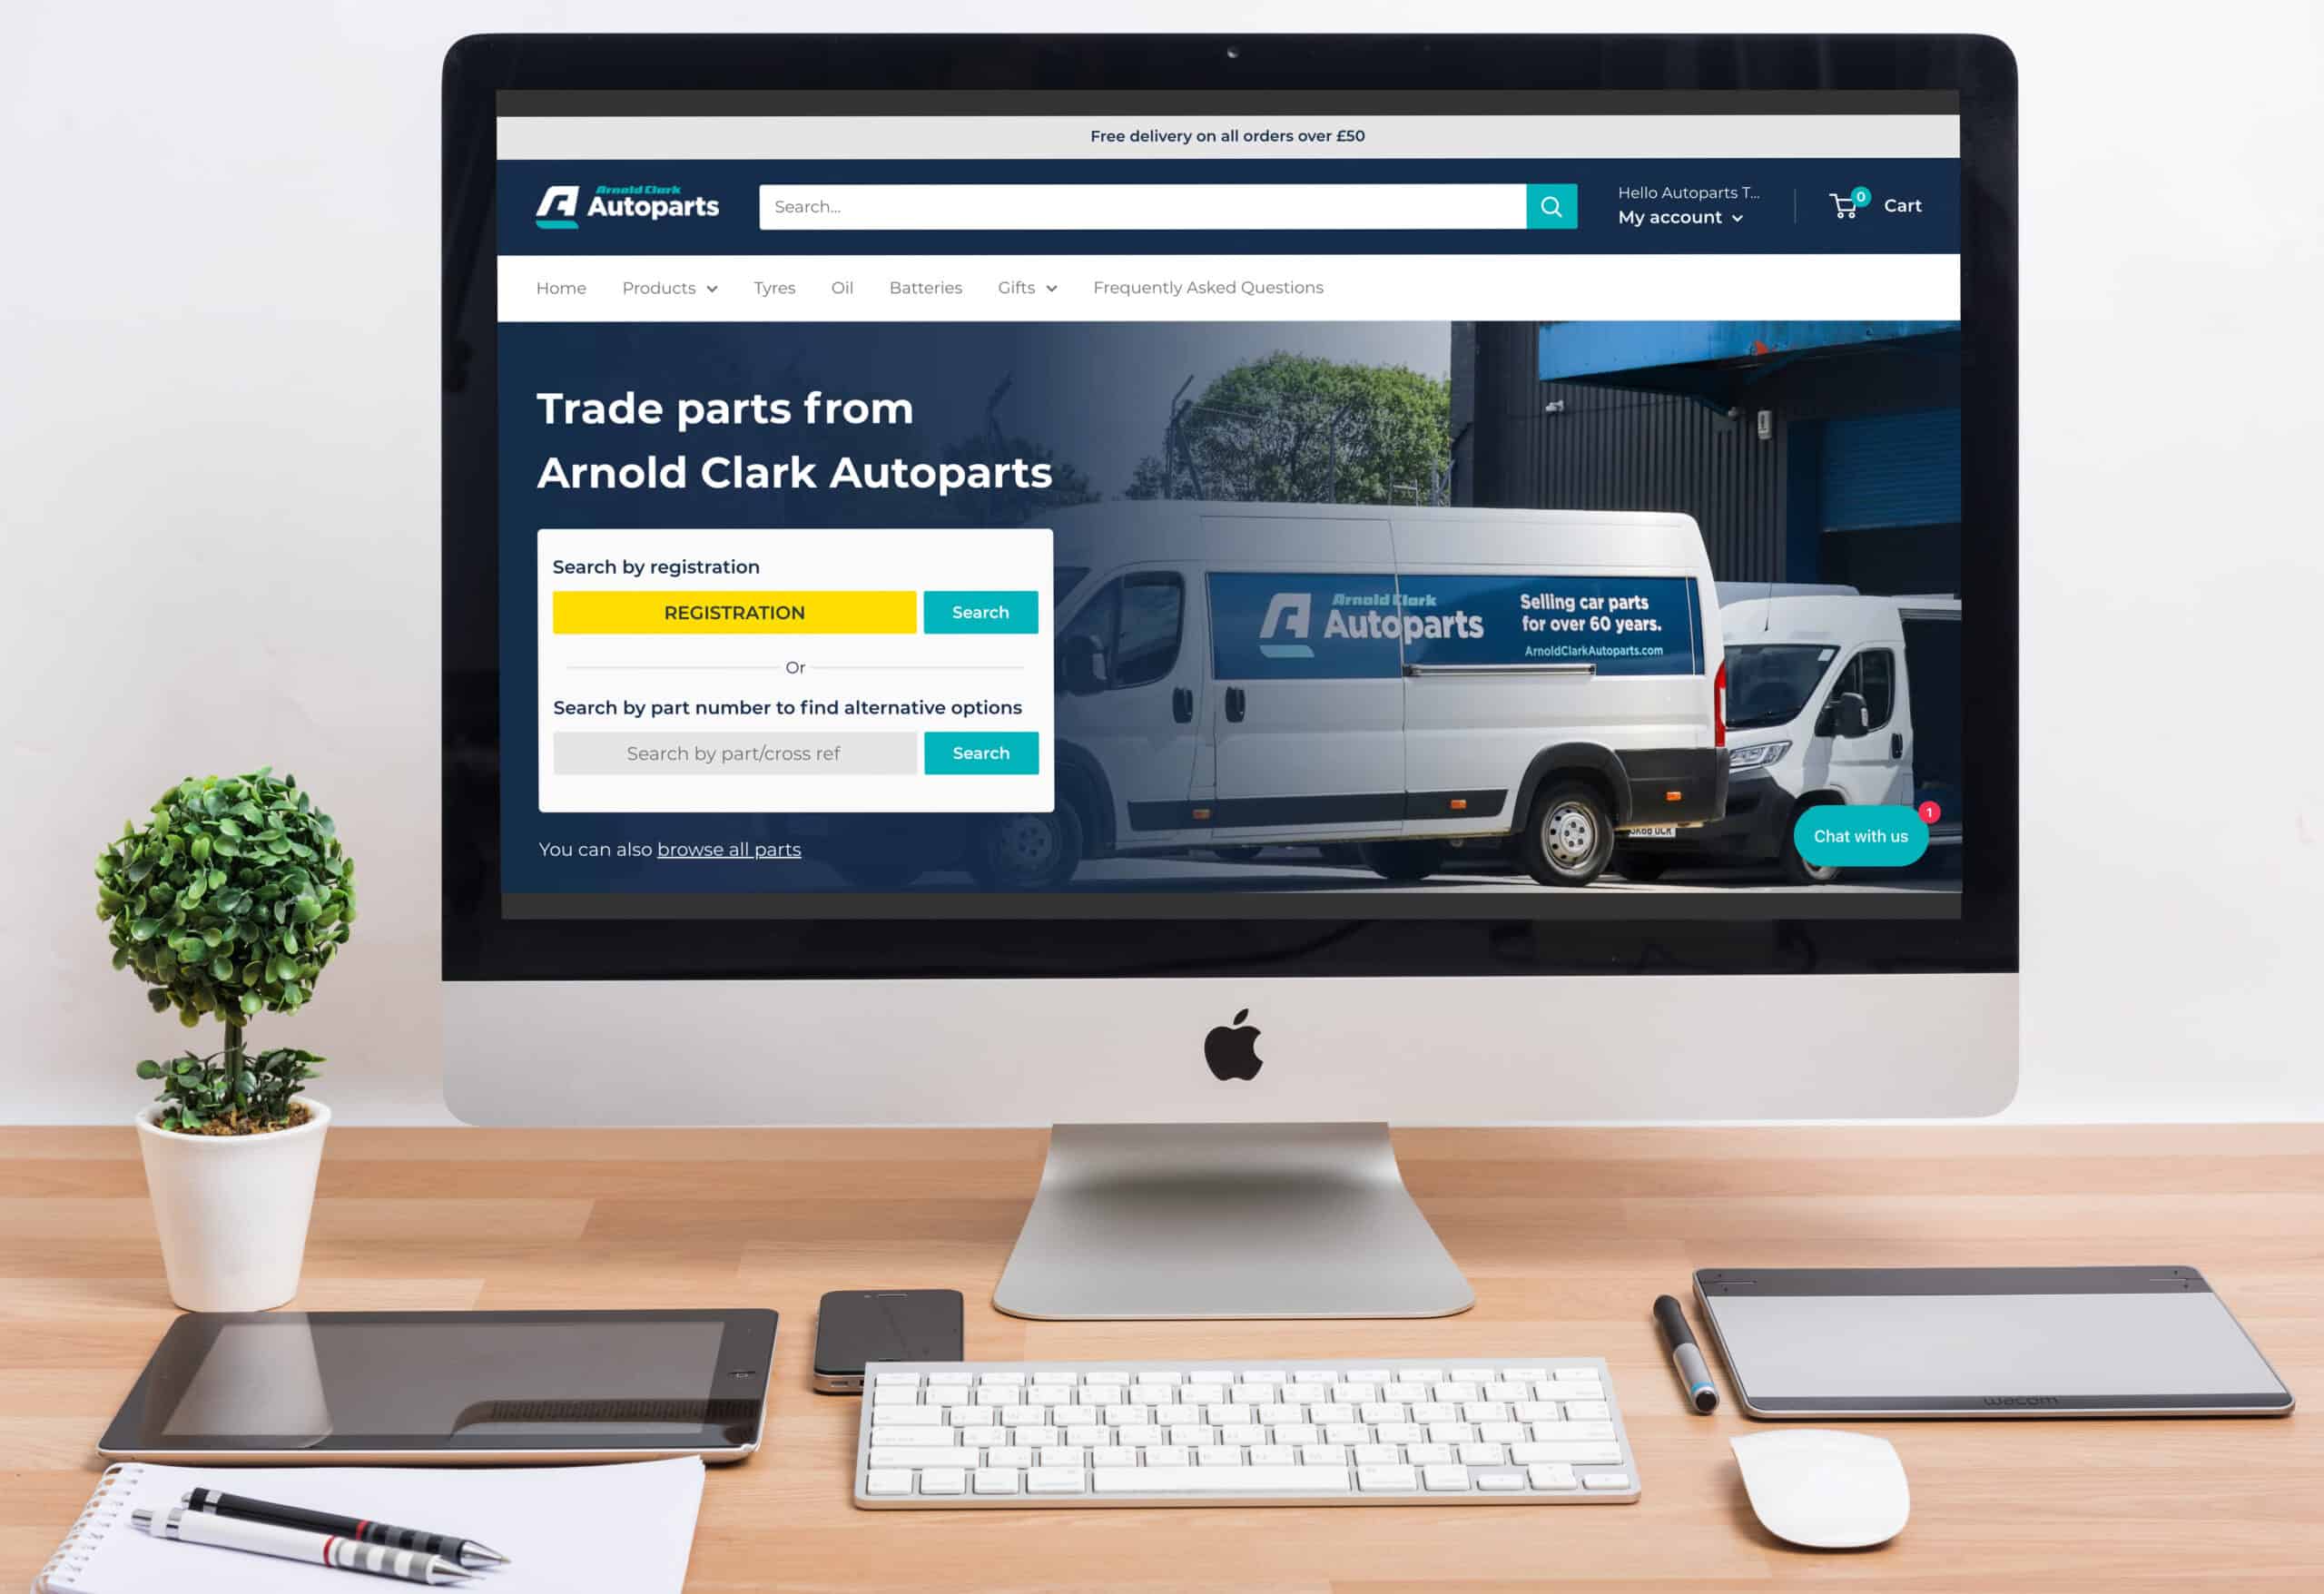 Arnold Clark Autoparts has launched a new trade website